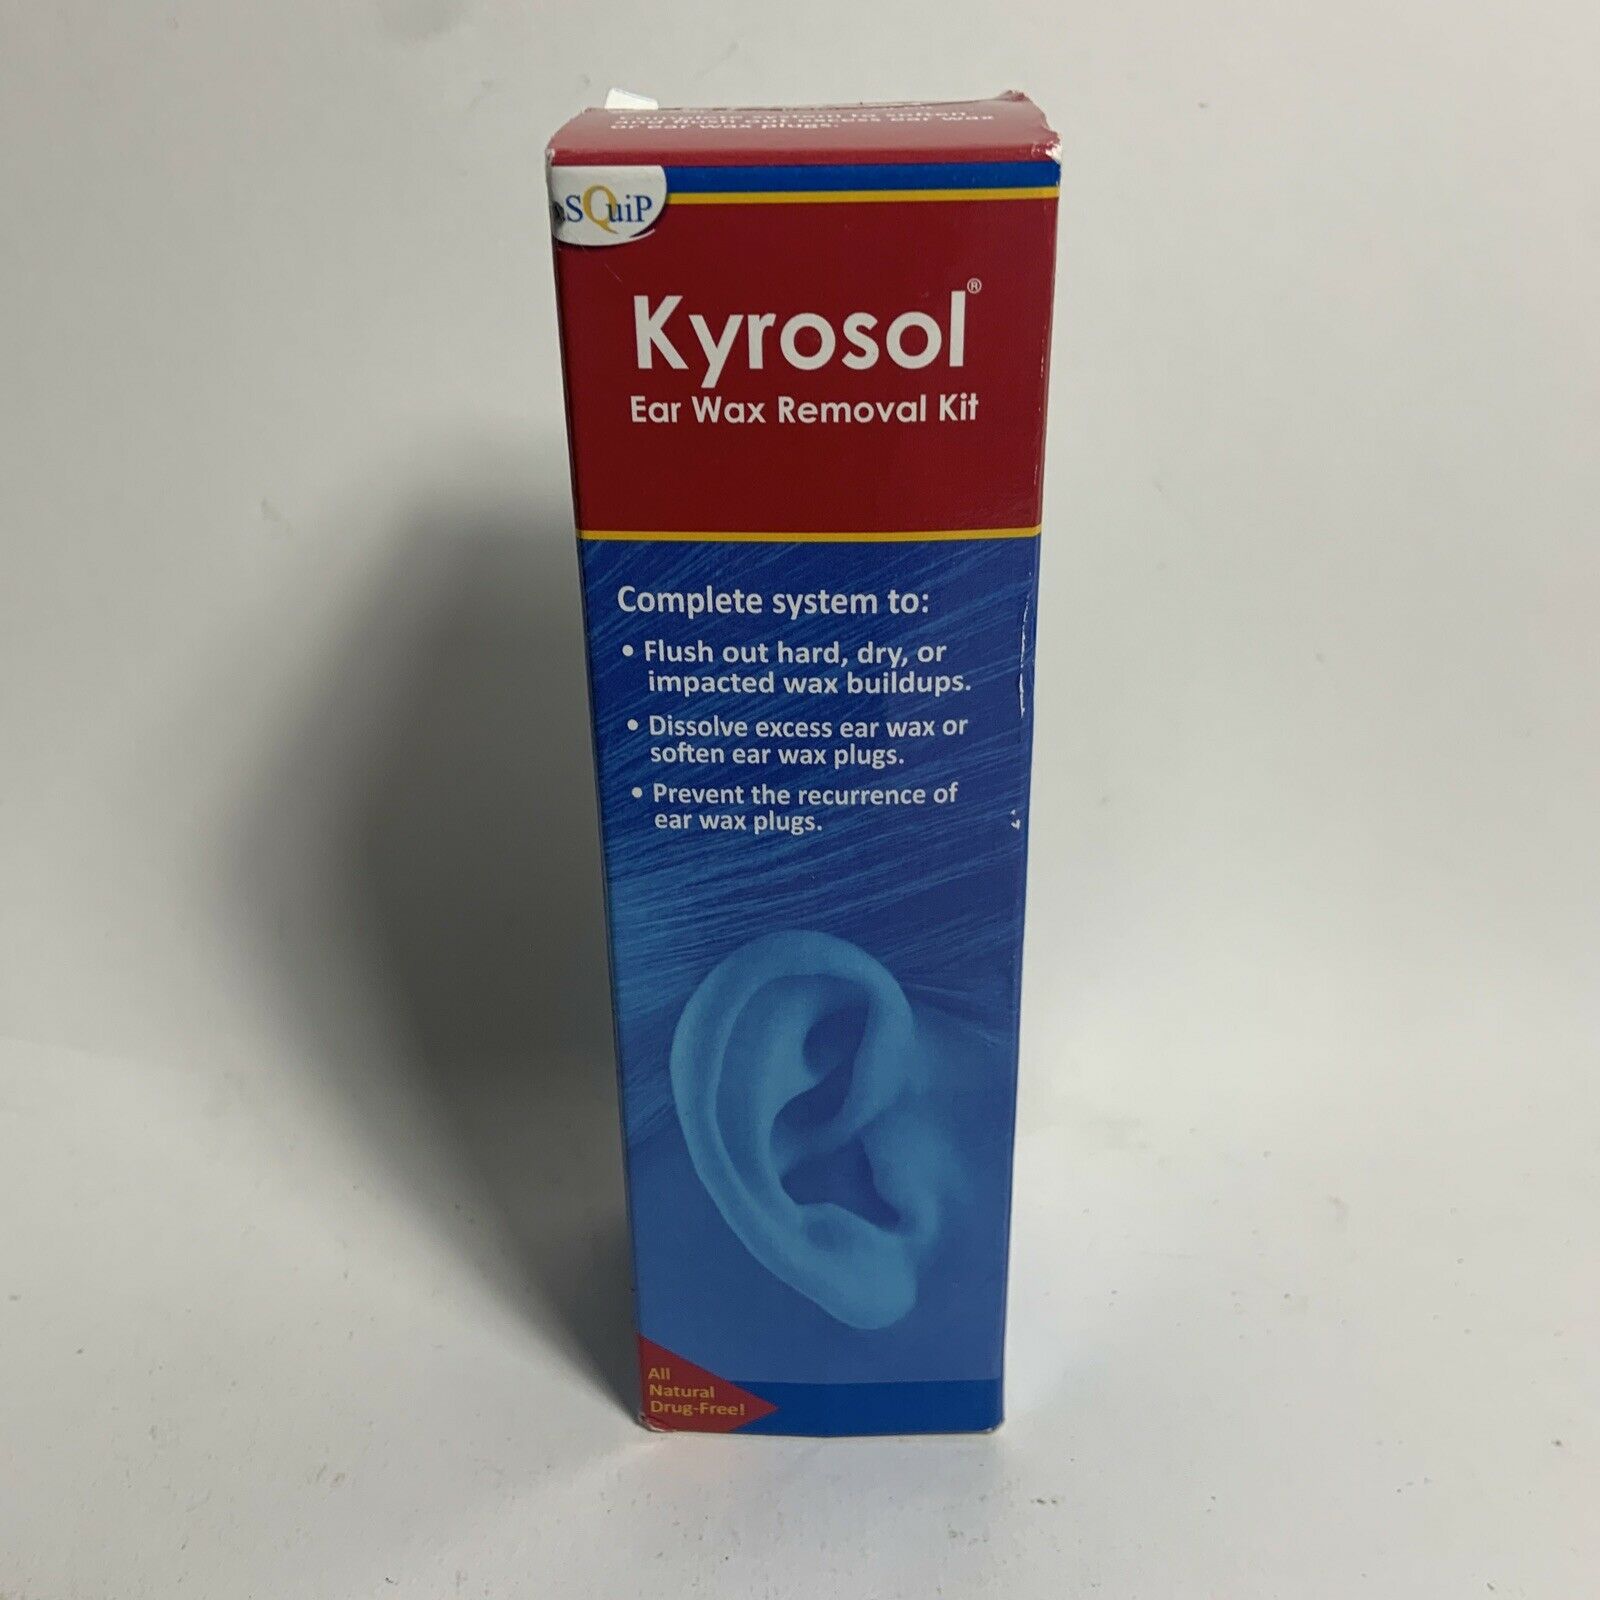 Neilmed (squip) Kyrosol All-natural Earwax Removal Aid